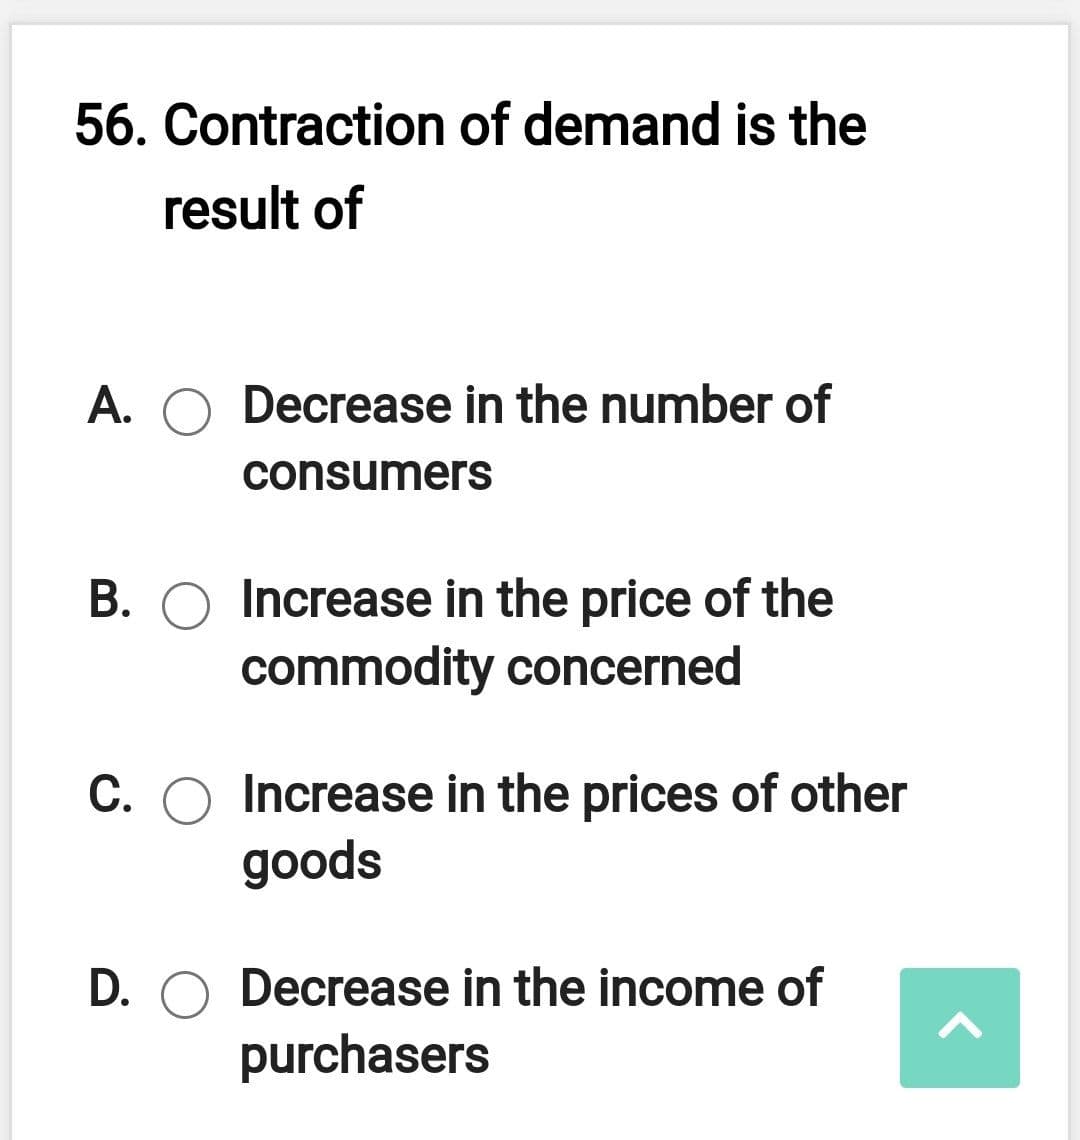 56. Contraction of demand is the
result of
A. O Decrease in the number of
consumers
B. O Increase in the price of the
commodity concerned
C. O Increase in the prices of other
goods
D. O Decrease in the income of
purchasers
